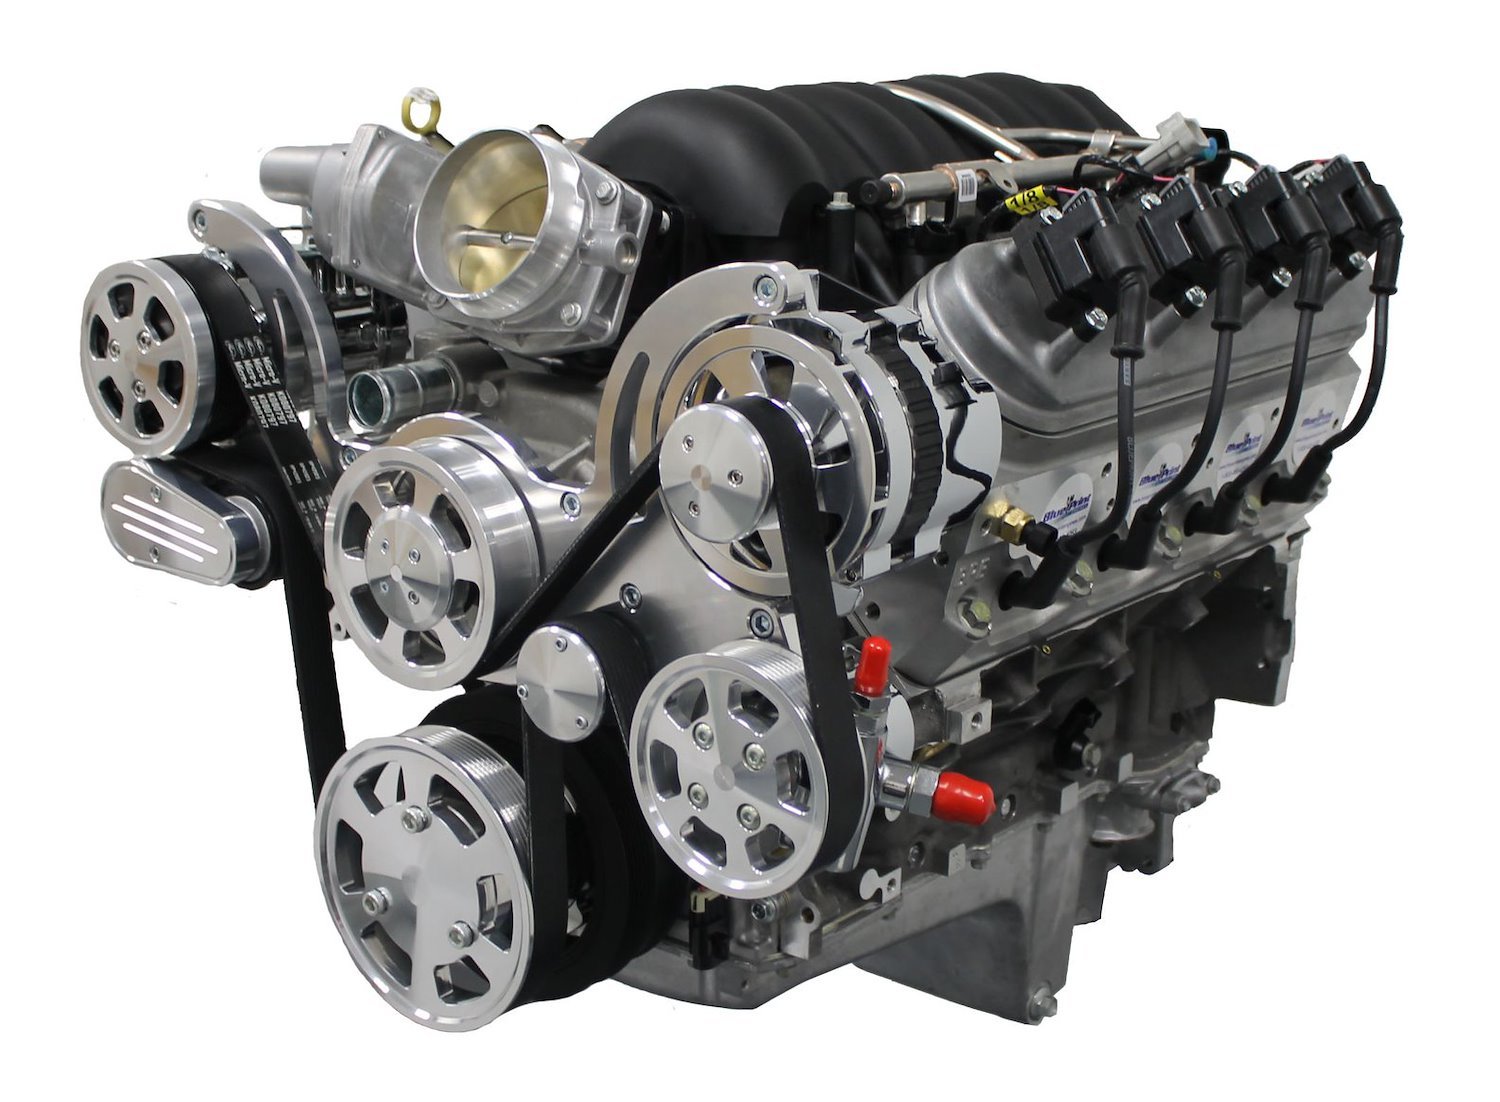 GM LS3 EFI Retrofit Dress Crate Engine with Accessory Drive System [530 HP, 495 FT.-LBS]